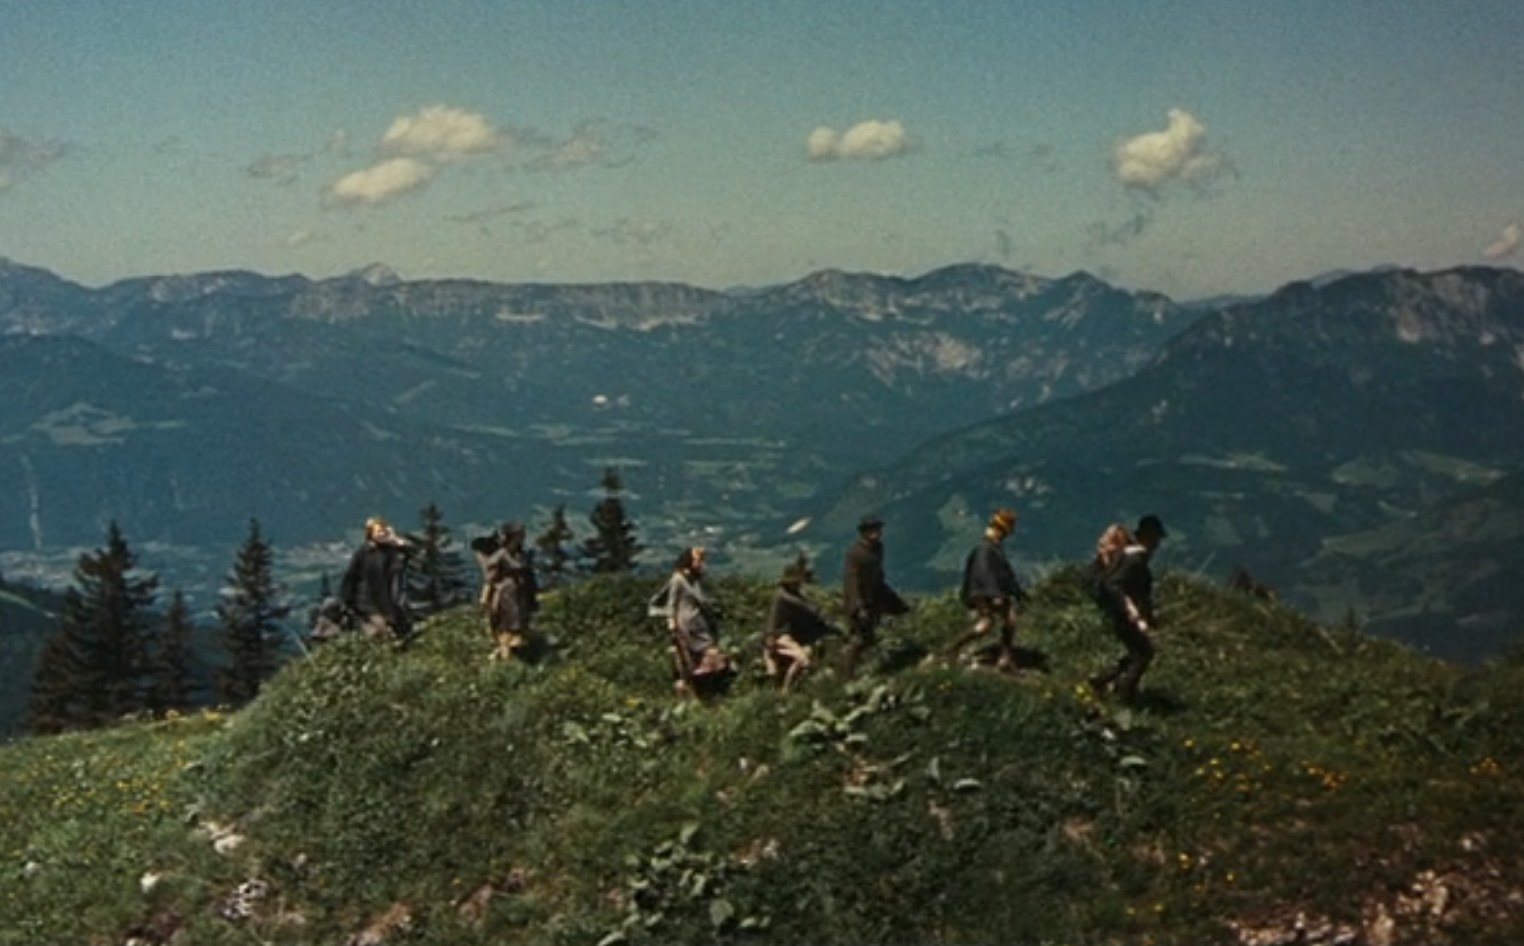 The von Trapps walk together in the Alps